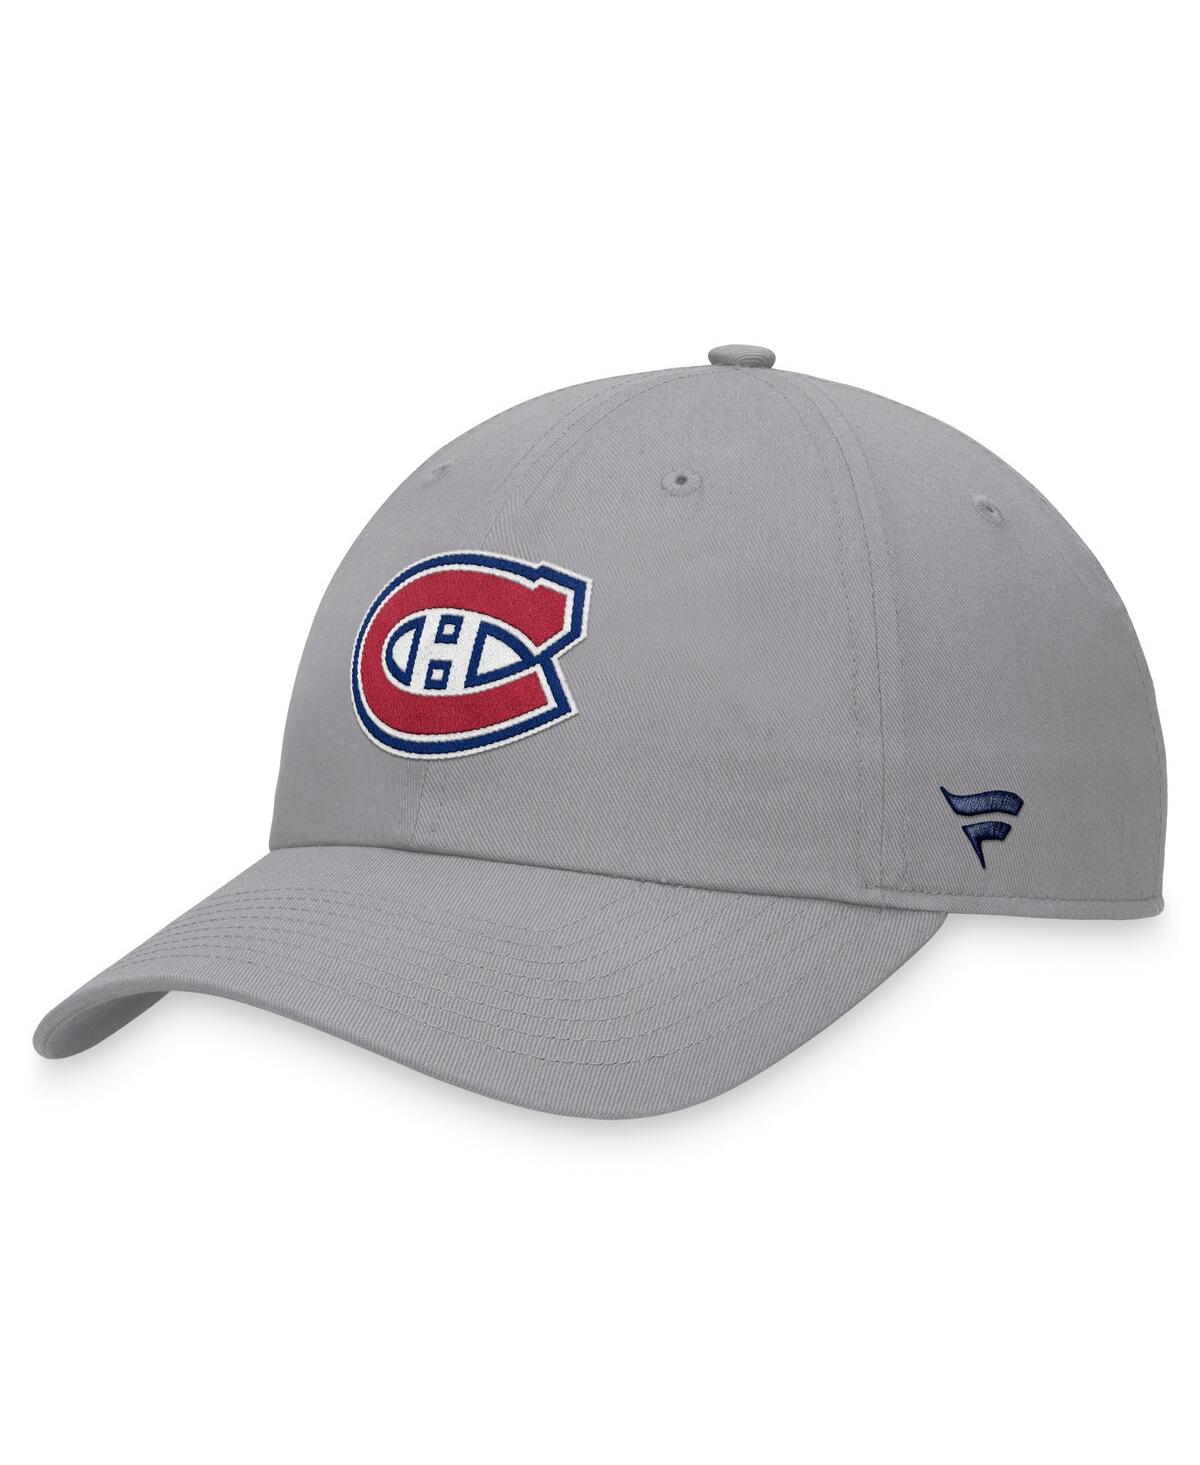 Men's Gray Montreal Canadiens Extra Time Adjustable Hat - Gray